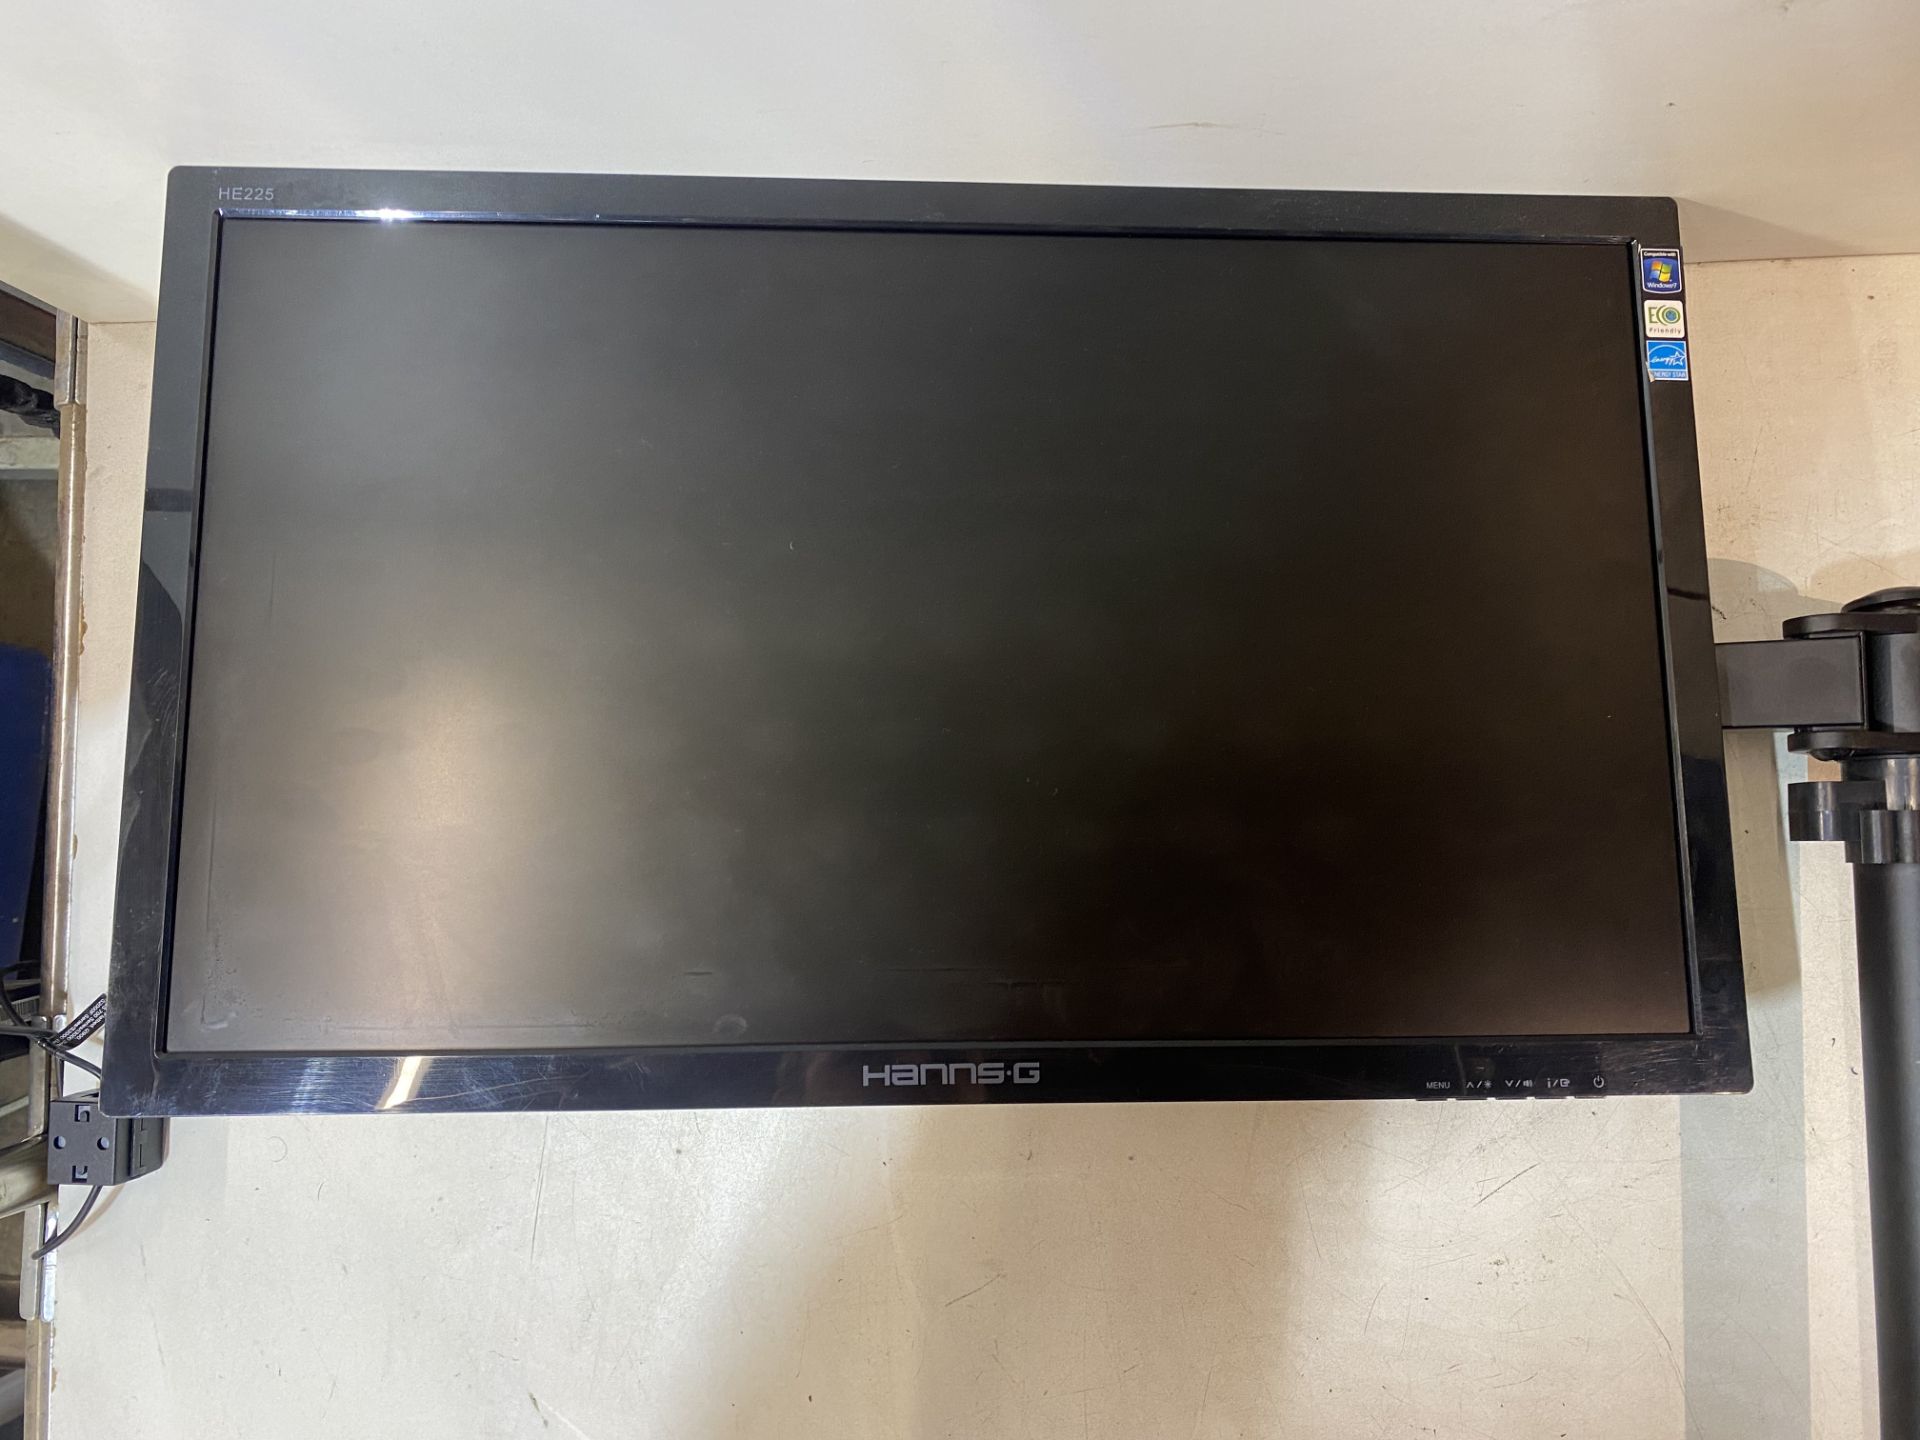 6 x Hanns G He225 21.5" LED LCD Monitors With Desk Mounted Monitor Stands - Image 2 of 17